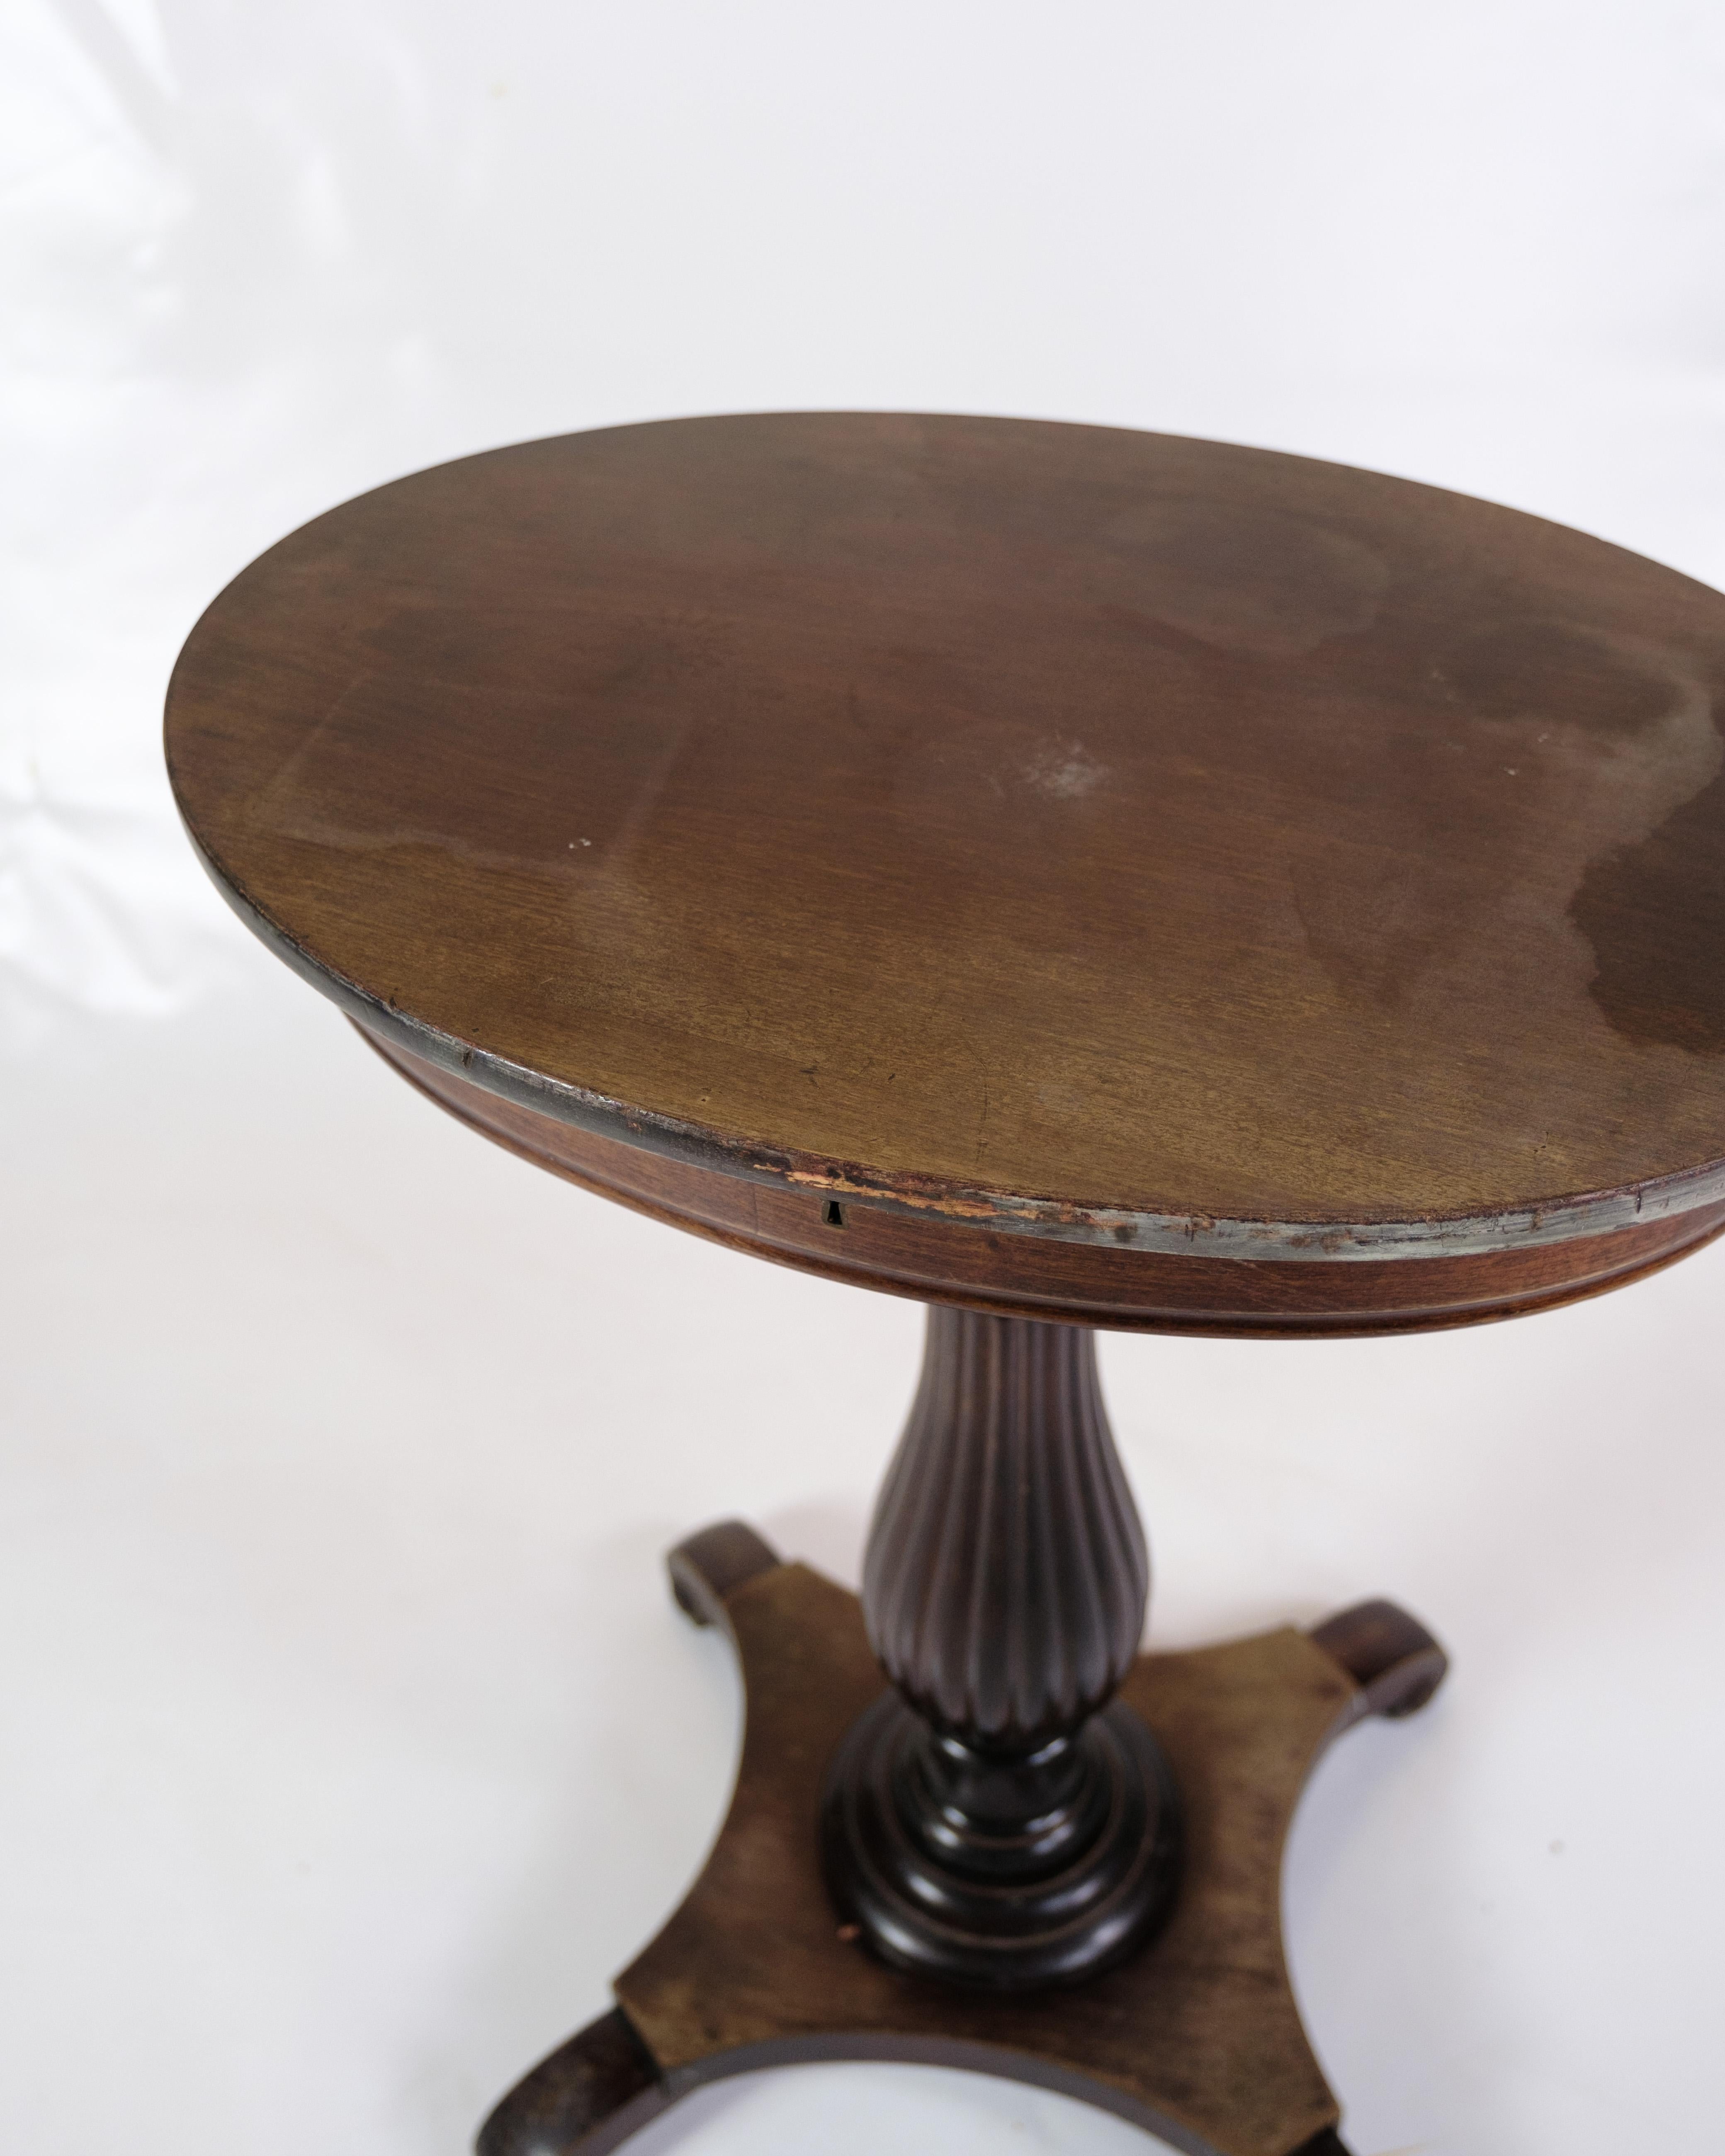 This elegant side table is a beautiful example of furniture craftsmanship from the 19th century, specifically the year 1890. Crafted from mahogany, this oval side table exudes timeless beauty and a warm, natural glow.

The most notable feature of